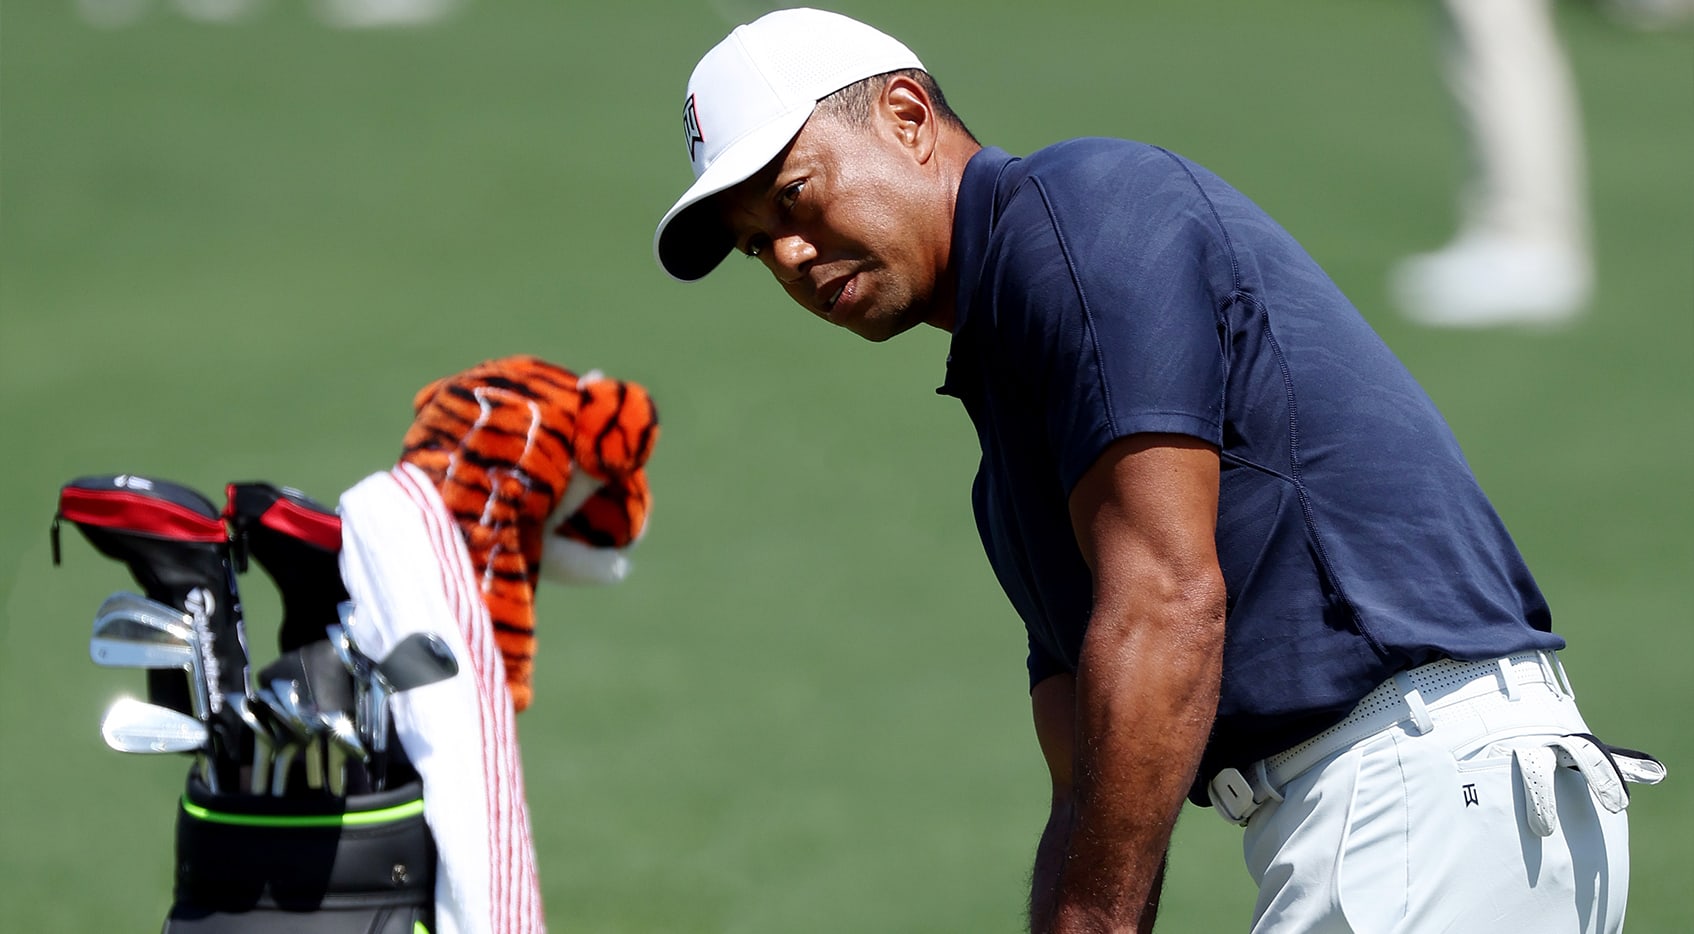 A look at Tiger Woods equipment for the Masters